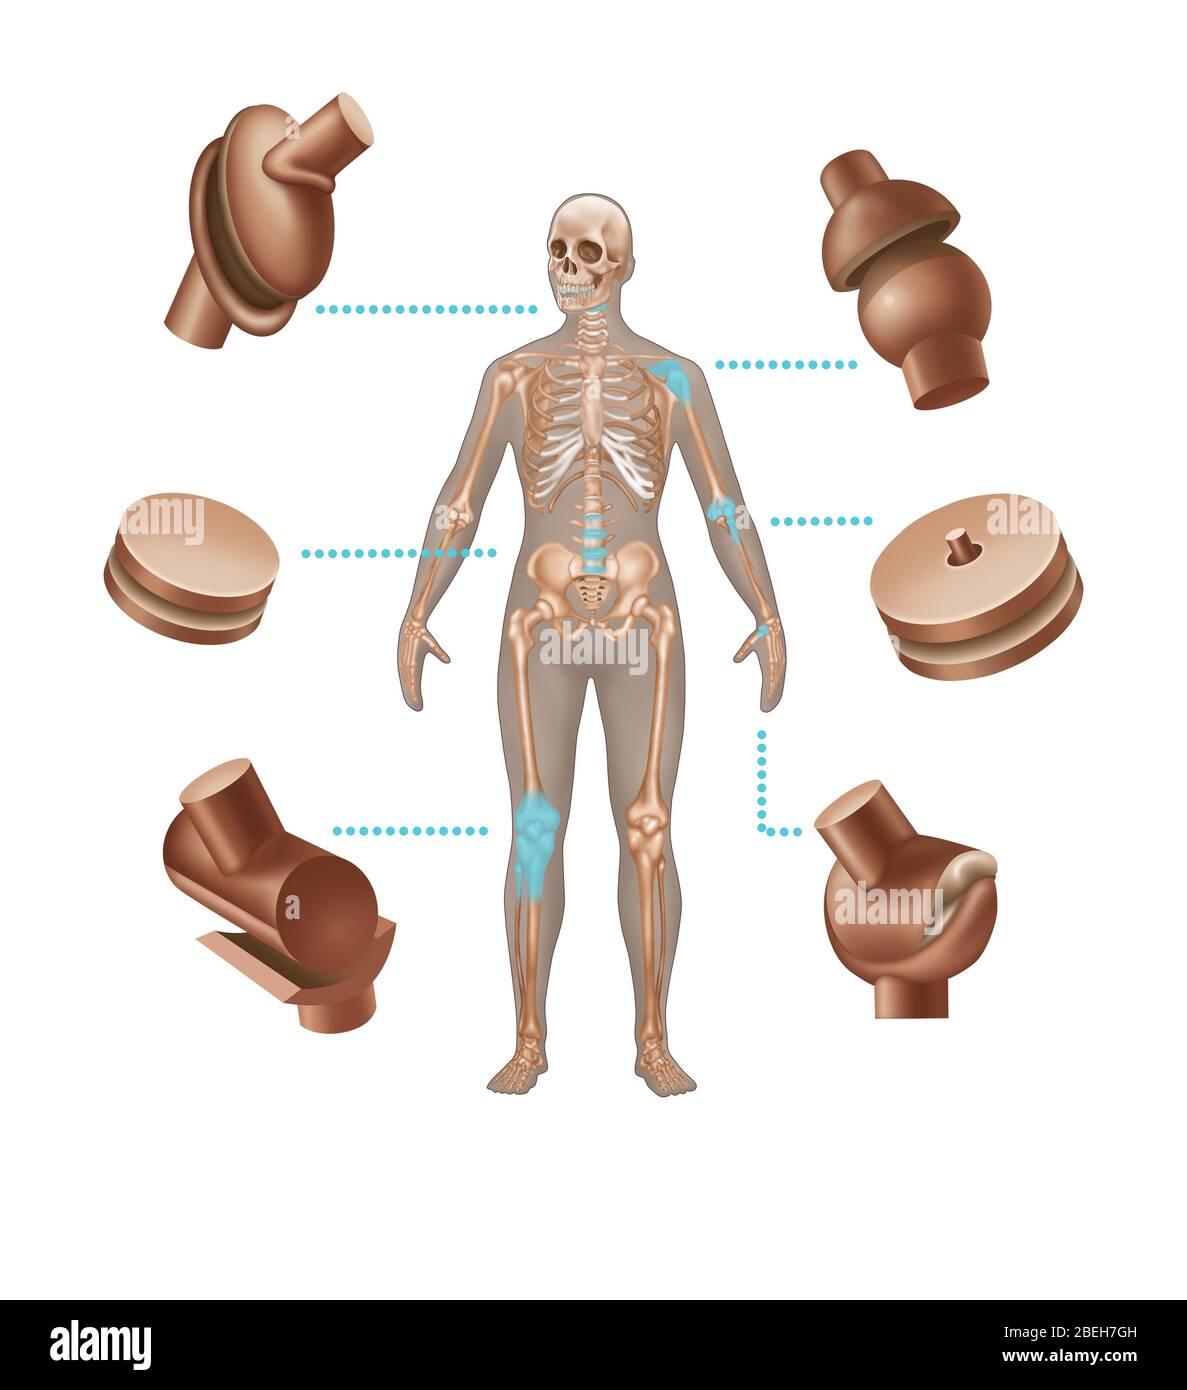 Human Joint Replacements, Illustration Stock Photo